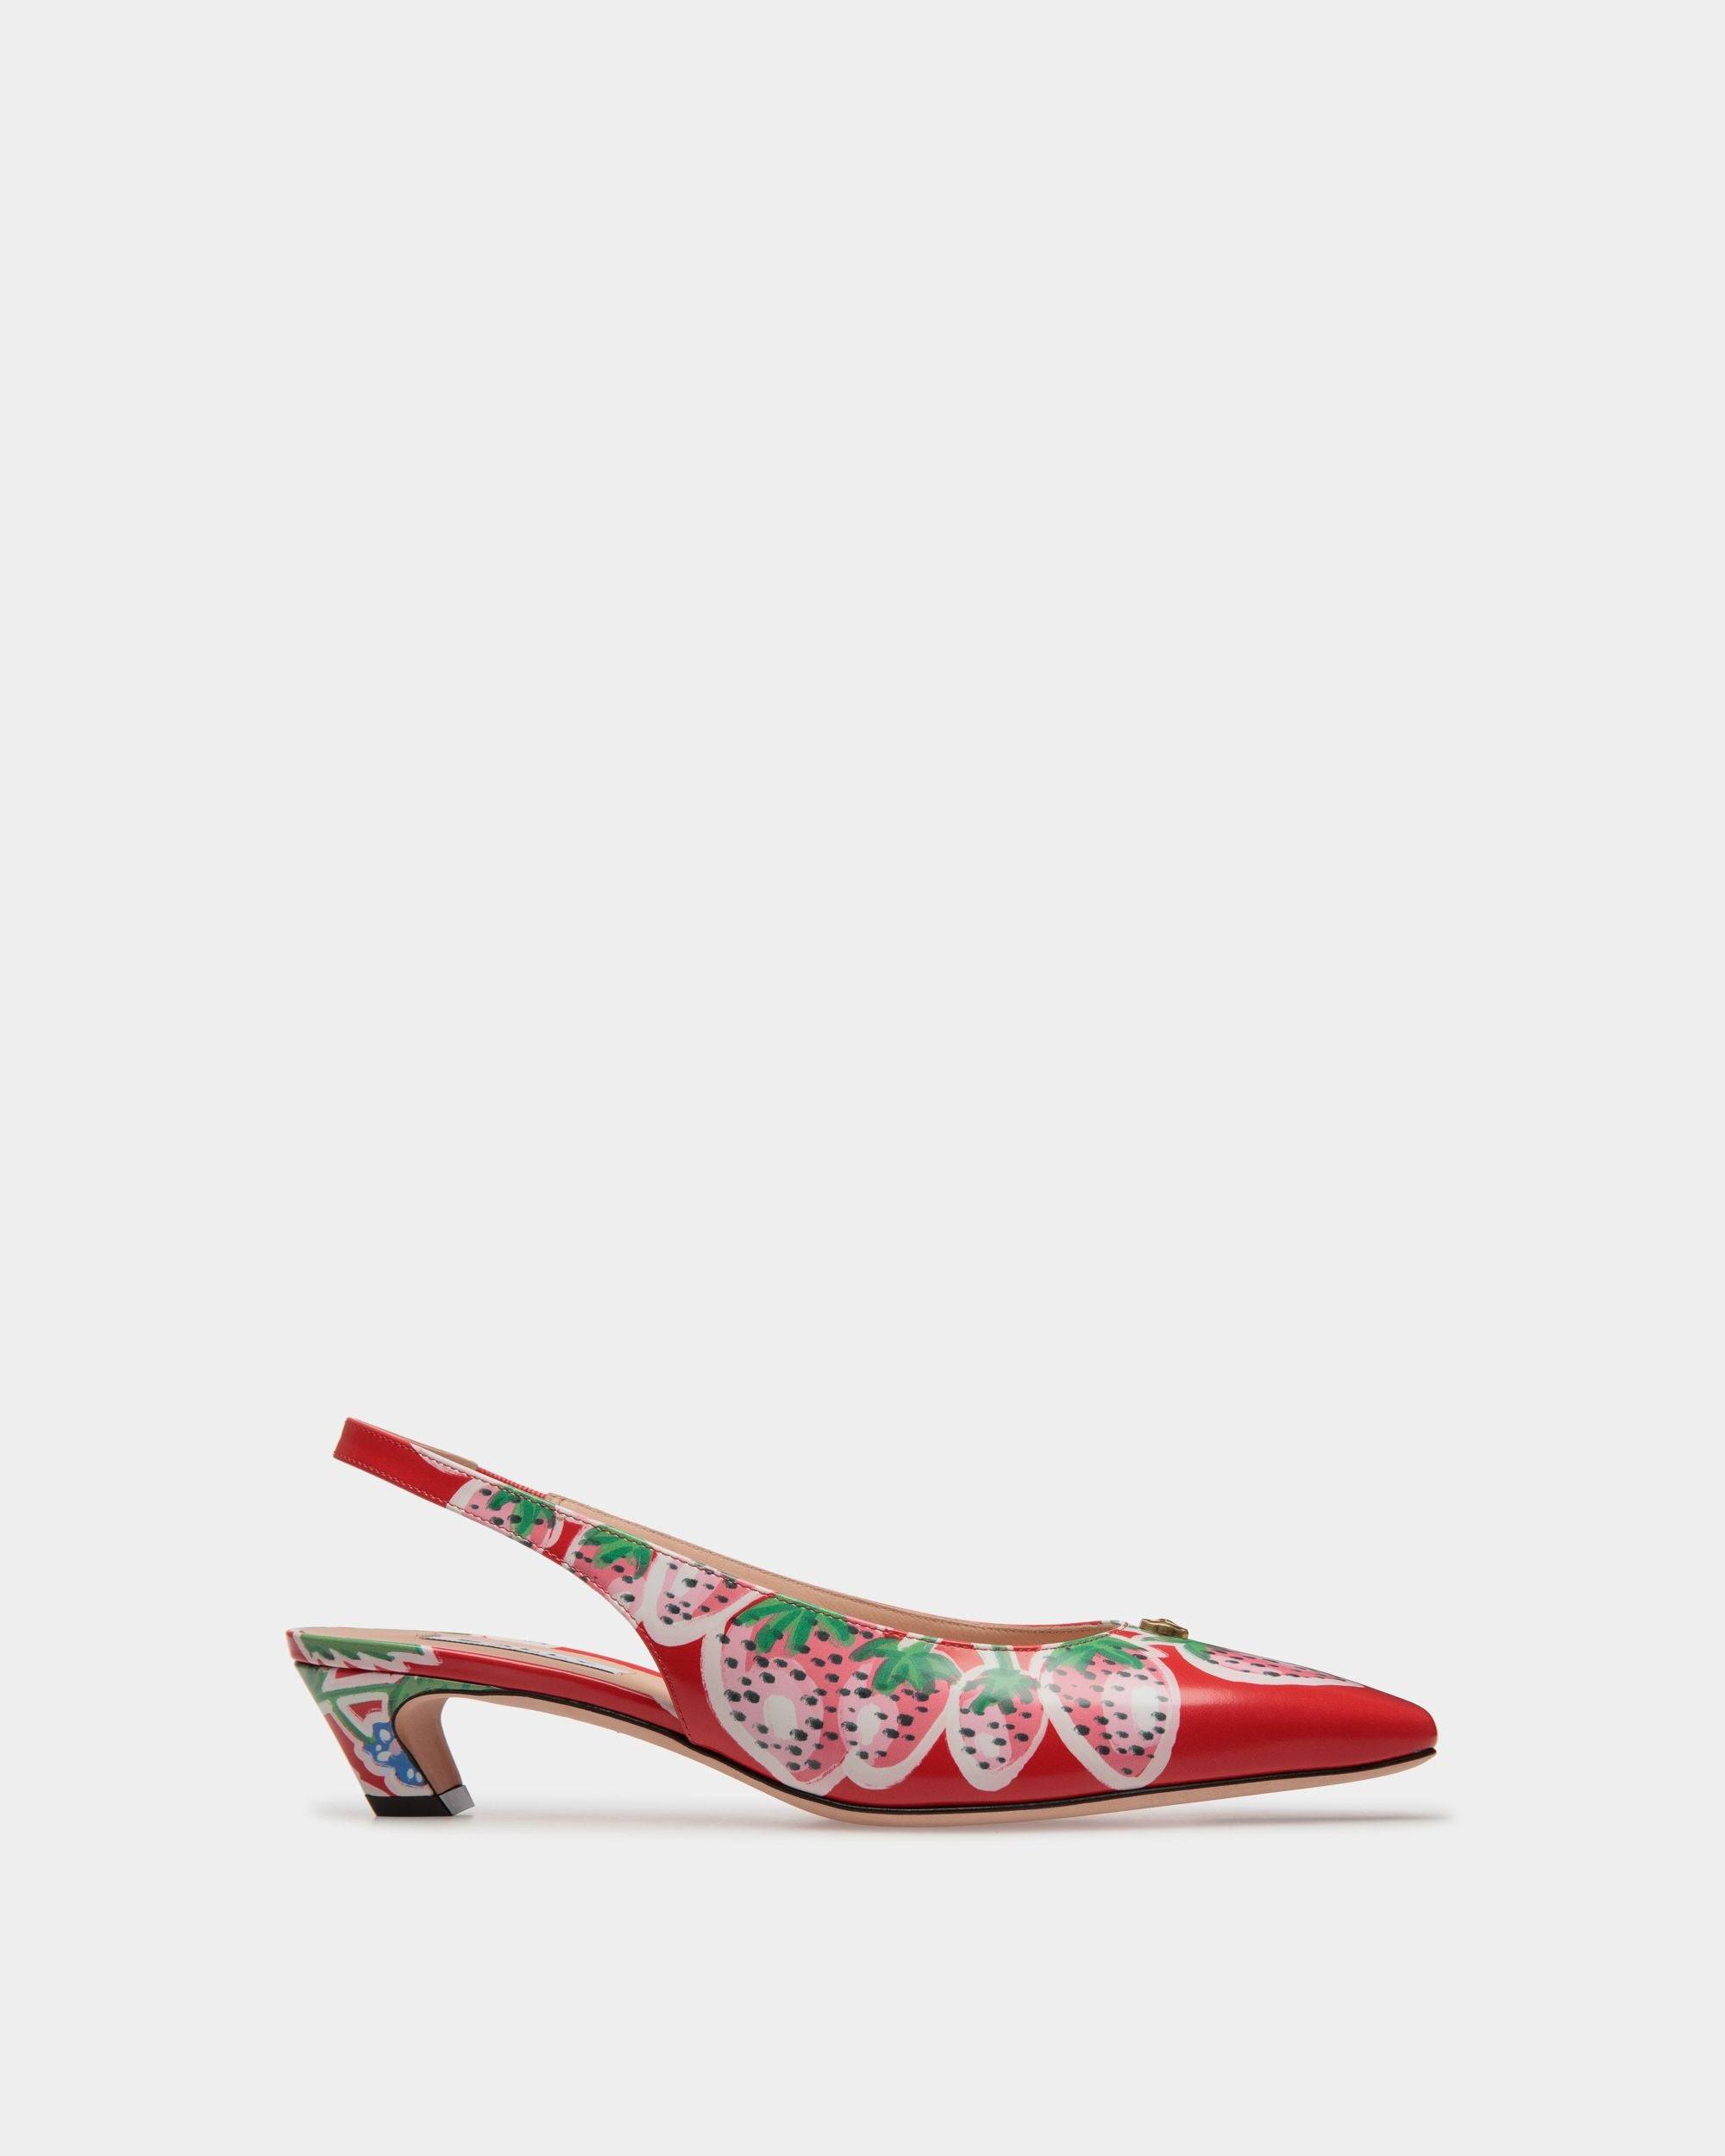 Sylt | Women's Slingback Pump in Strawberry Print Brushed Leather | Bally | Still Life Side